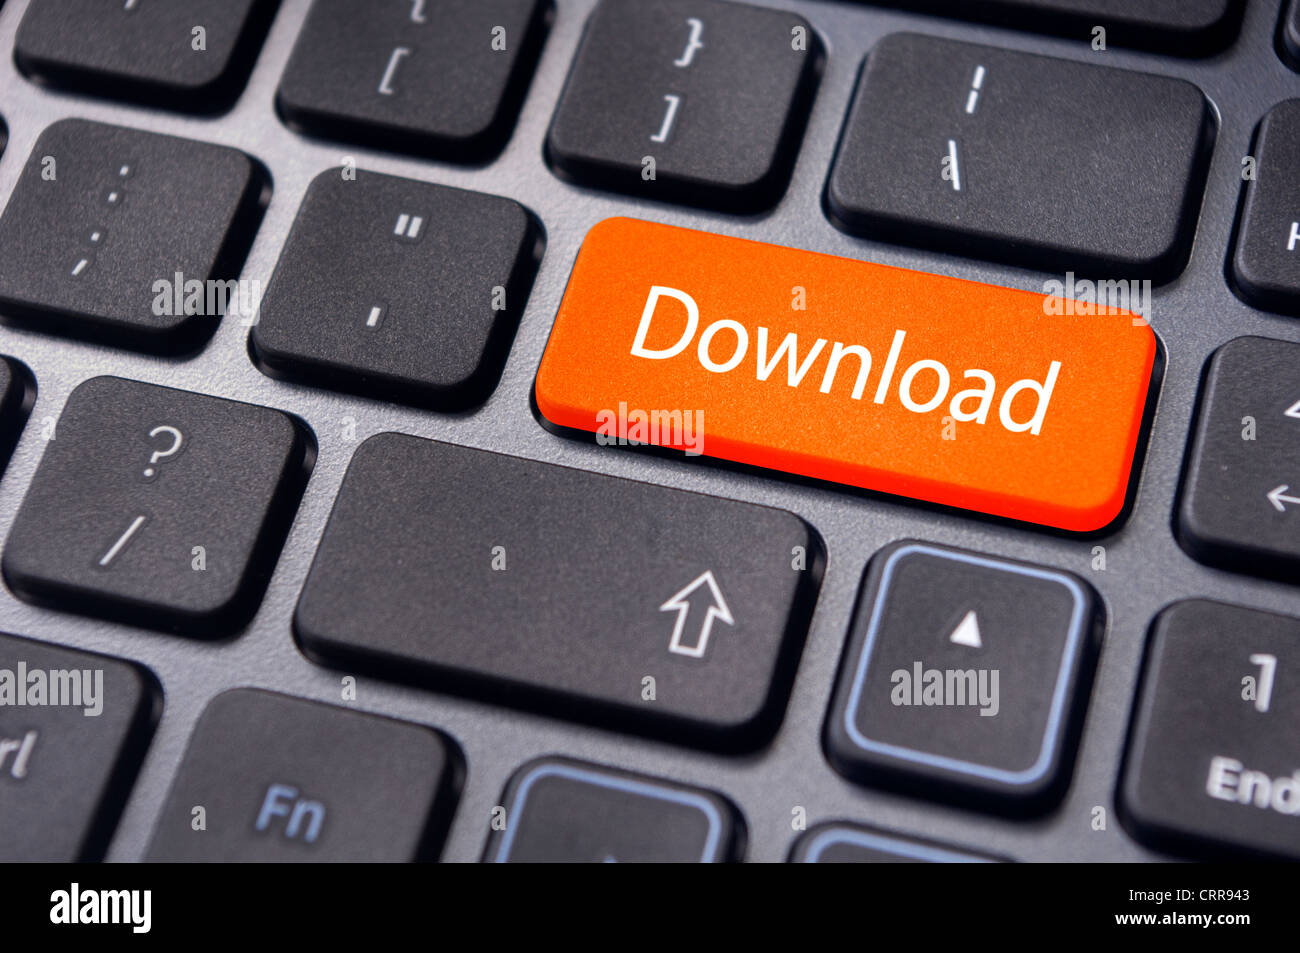 download concepts, to transfer data from internet. Stock Photo